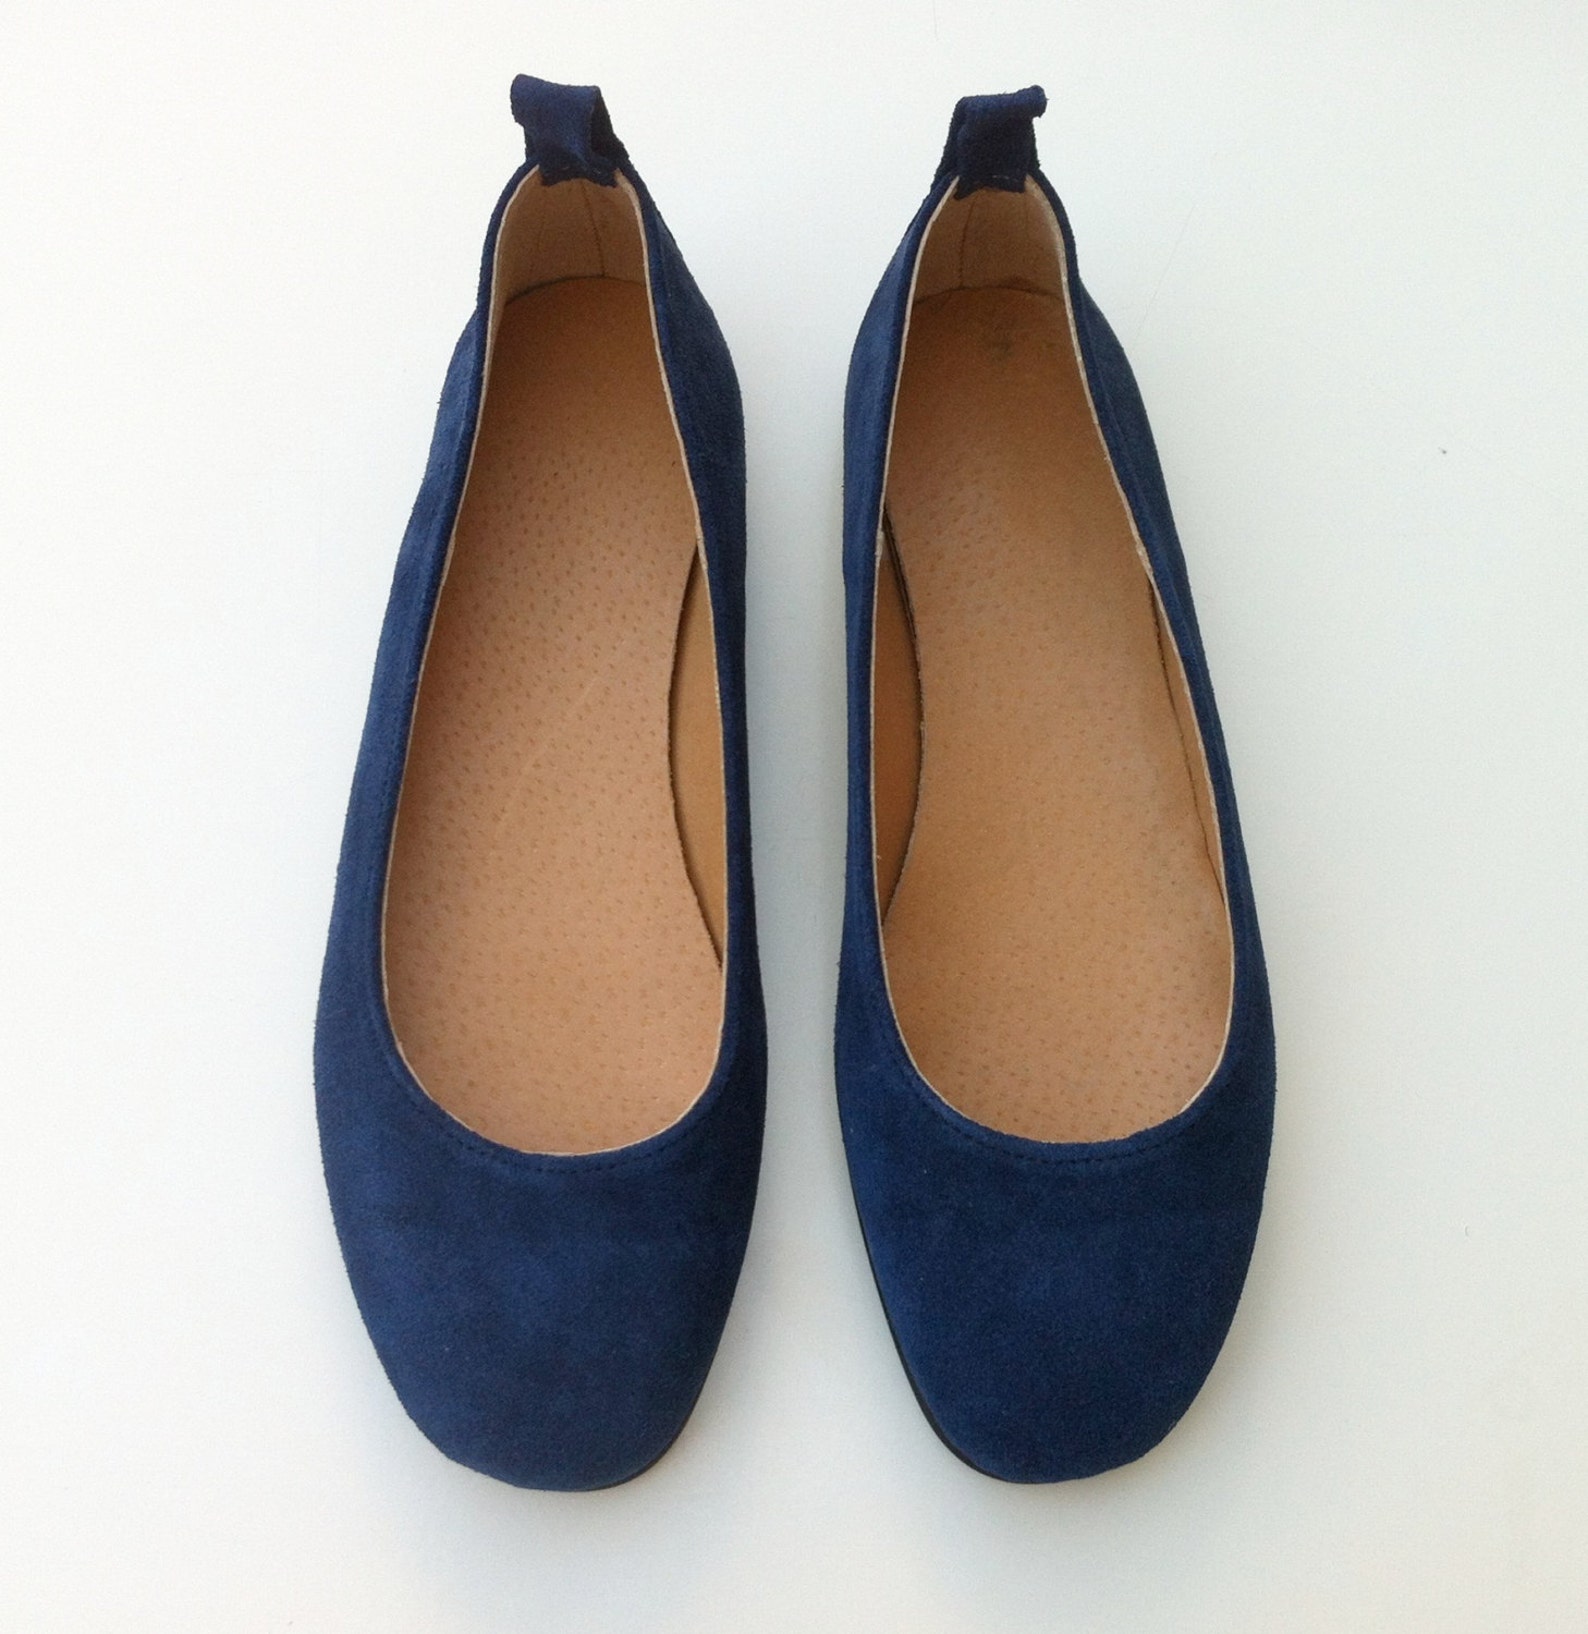 leather flat shoes for women - womens ballet shoes - blue leather shoes - leather pumps